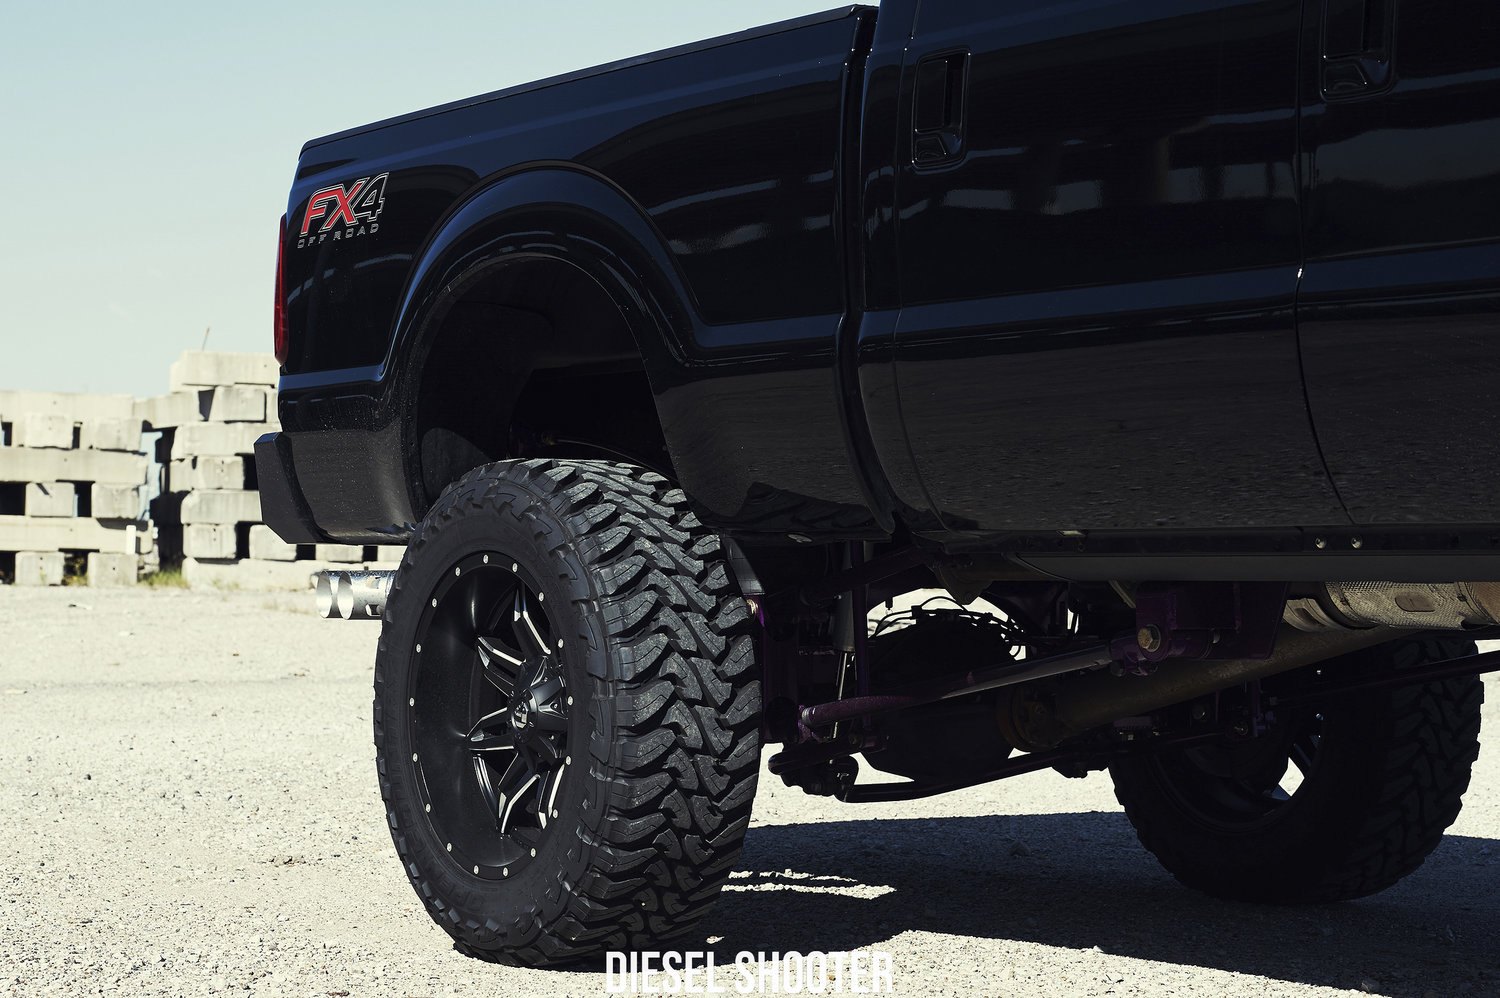 22 Inch Fuel Off-Road Lethal wheels on Custom Ford F-250 - Photo by Diesel Shooter